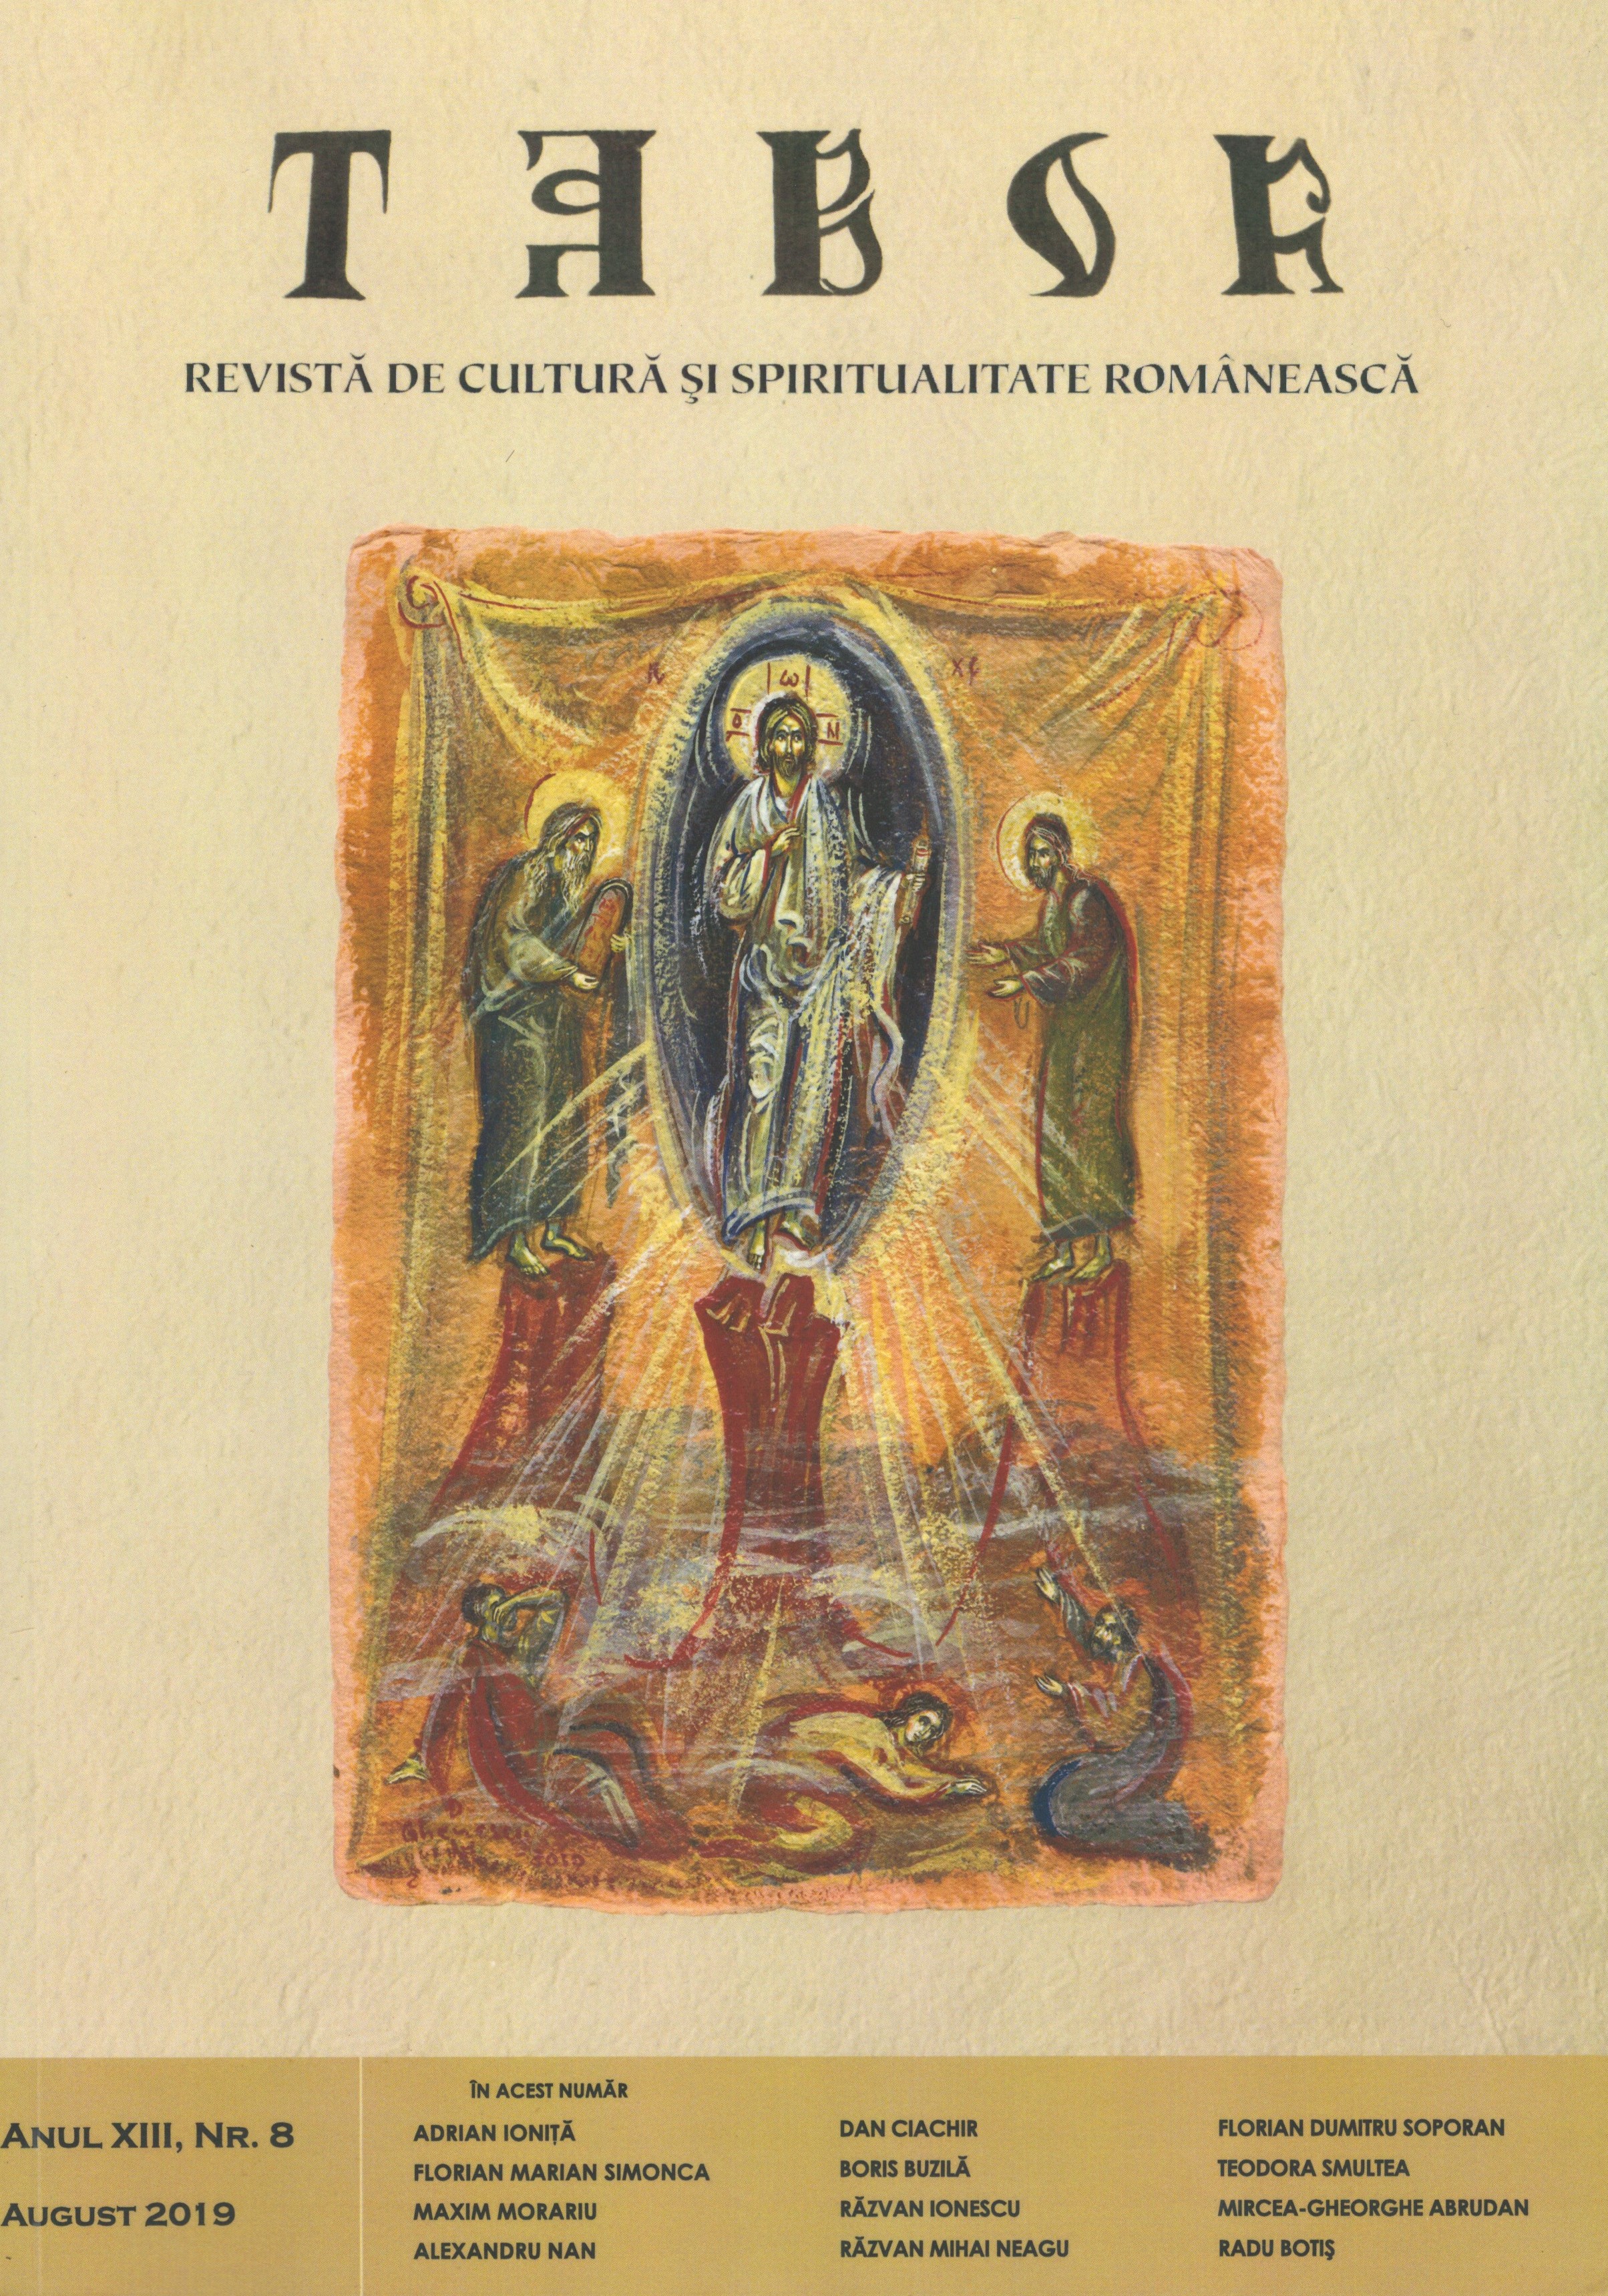 From defensive to introspection and deep Christianization: the Orthodox world and the Reformation Cover Image